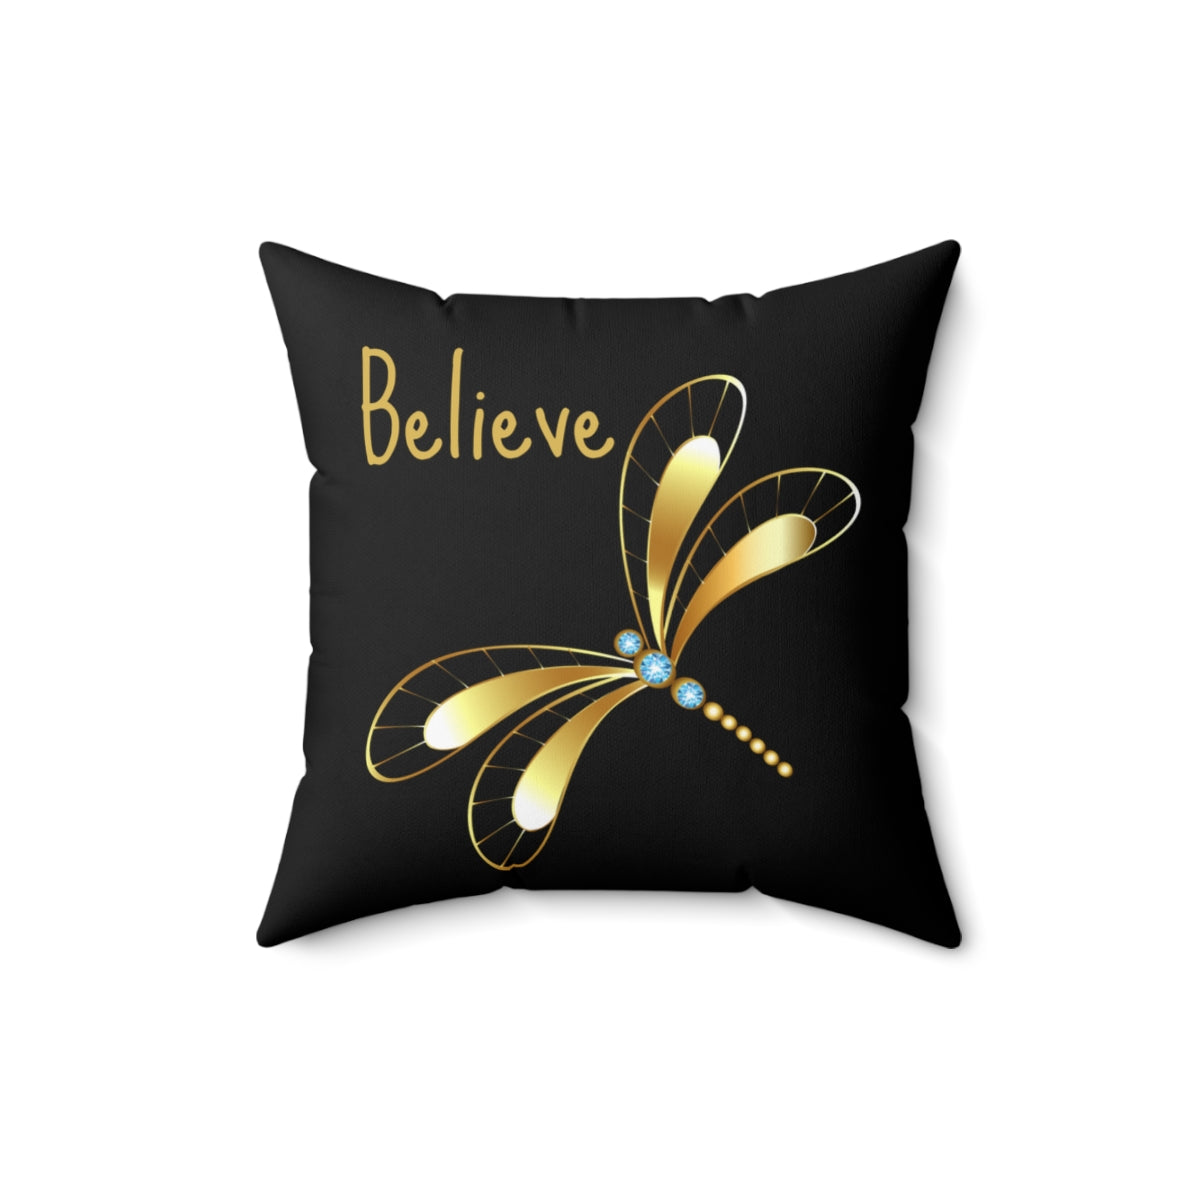 Dragonfly Pillow / Gold and Black Throw Pillow